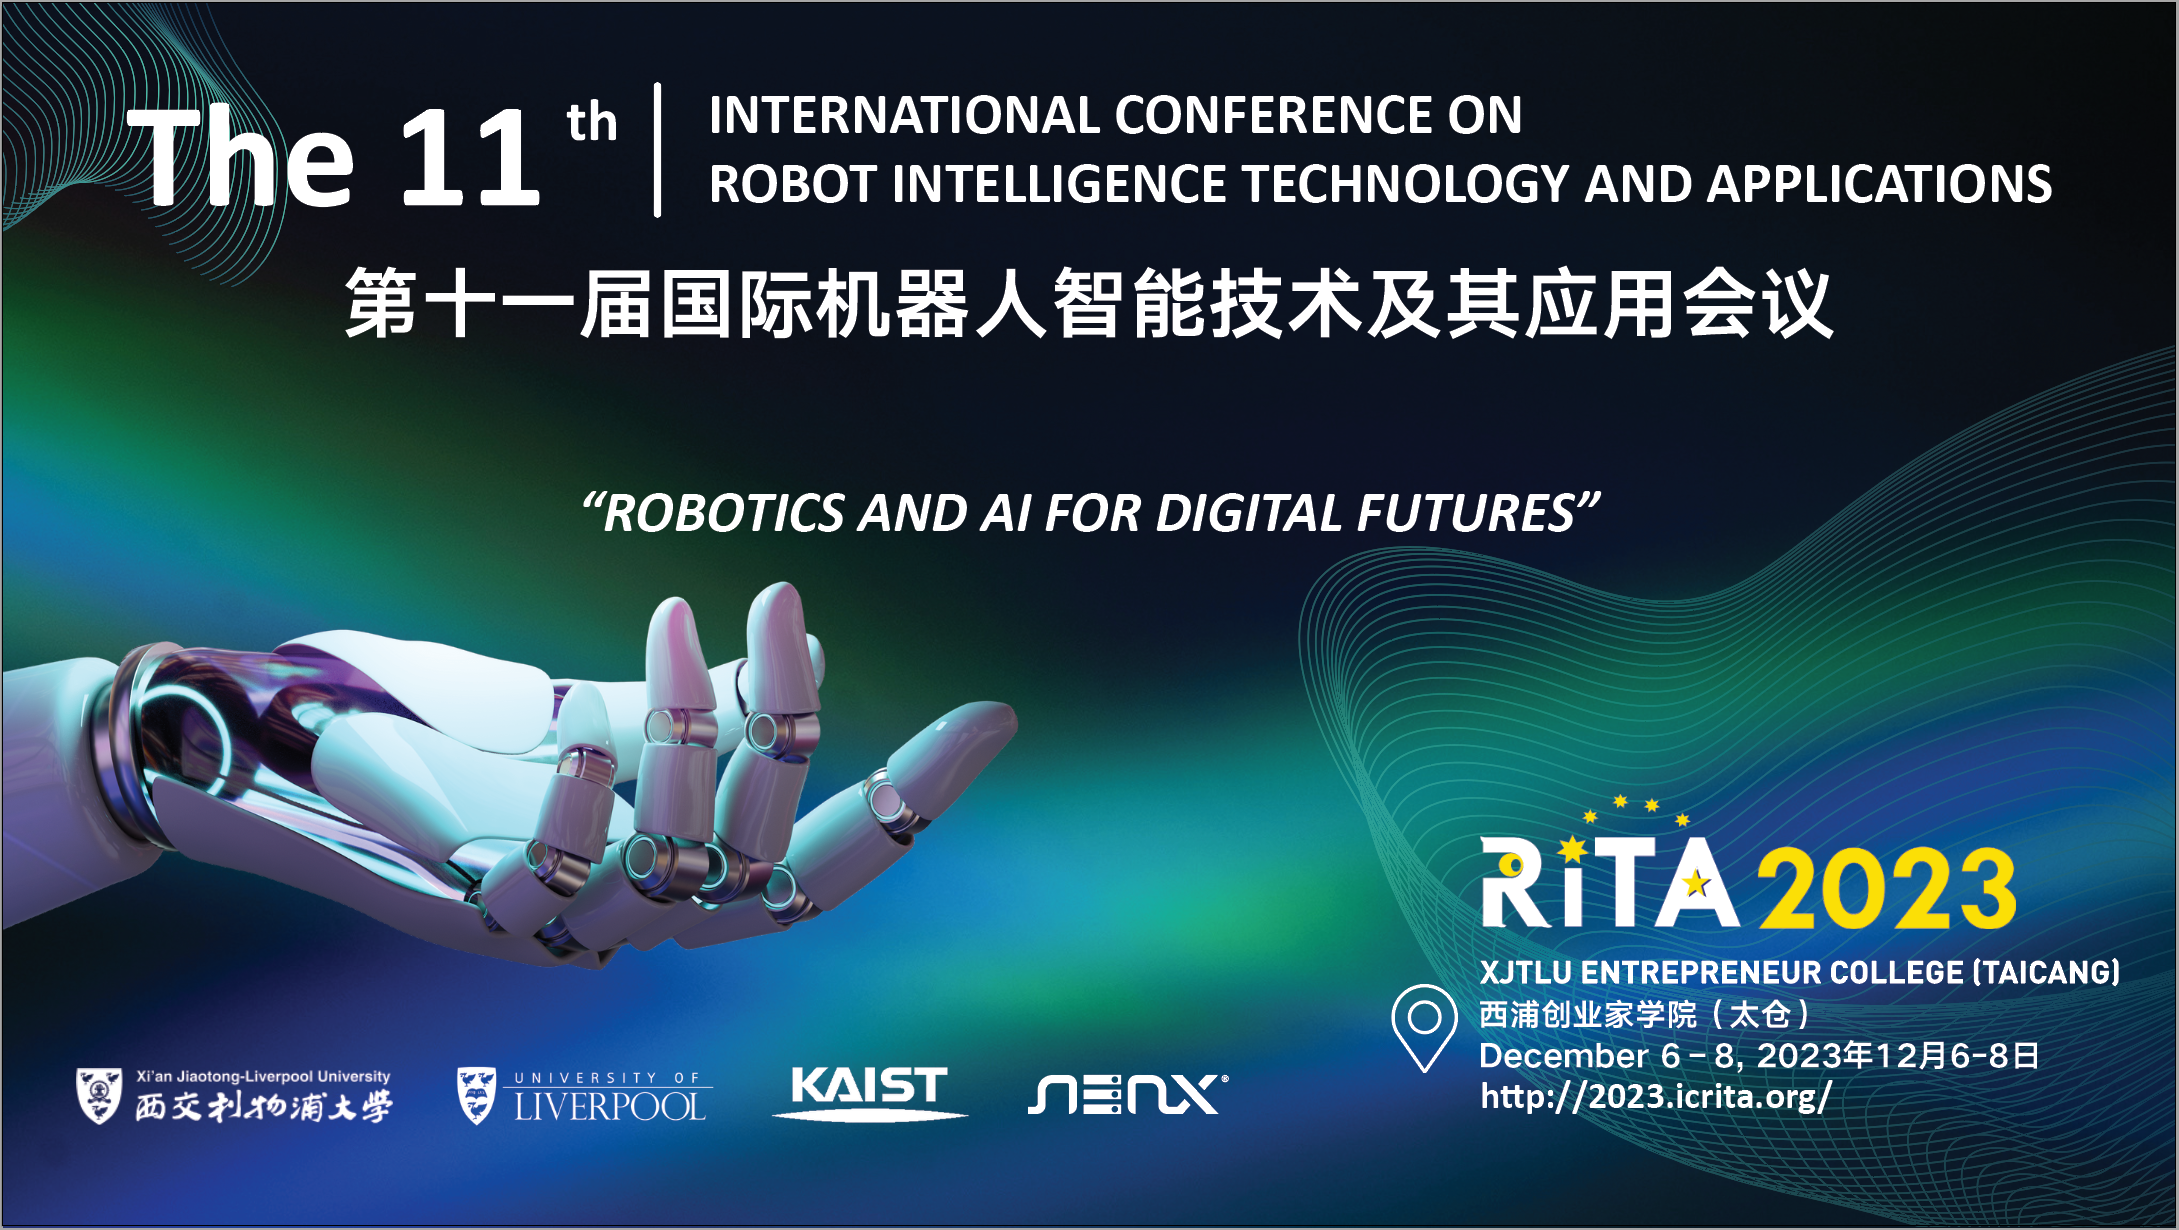 Expert talks on the future of robotics and AI open to the public